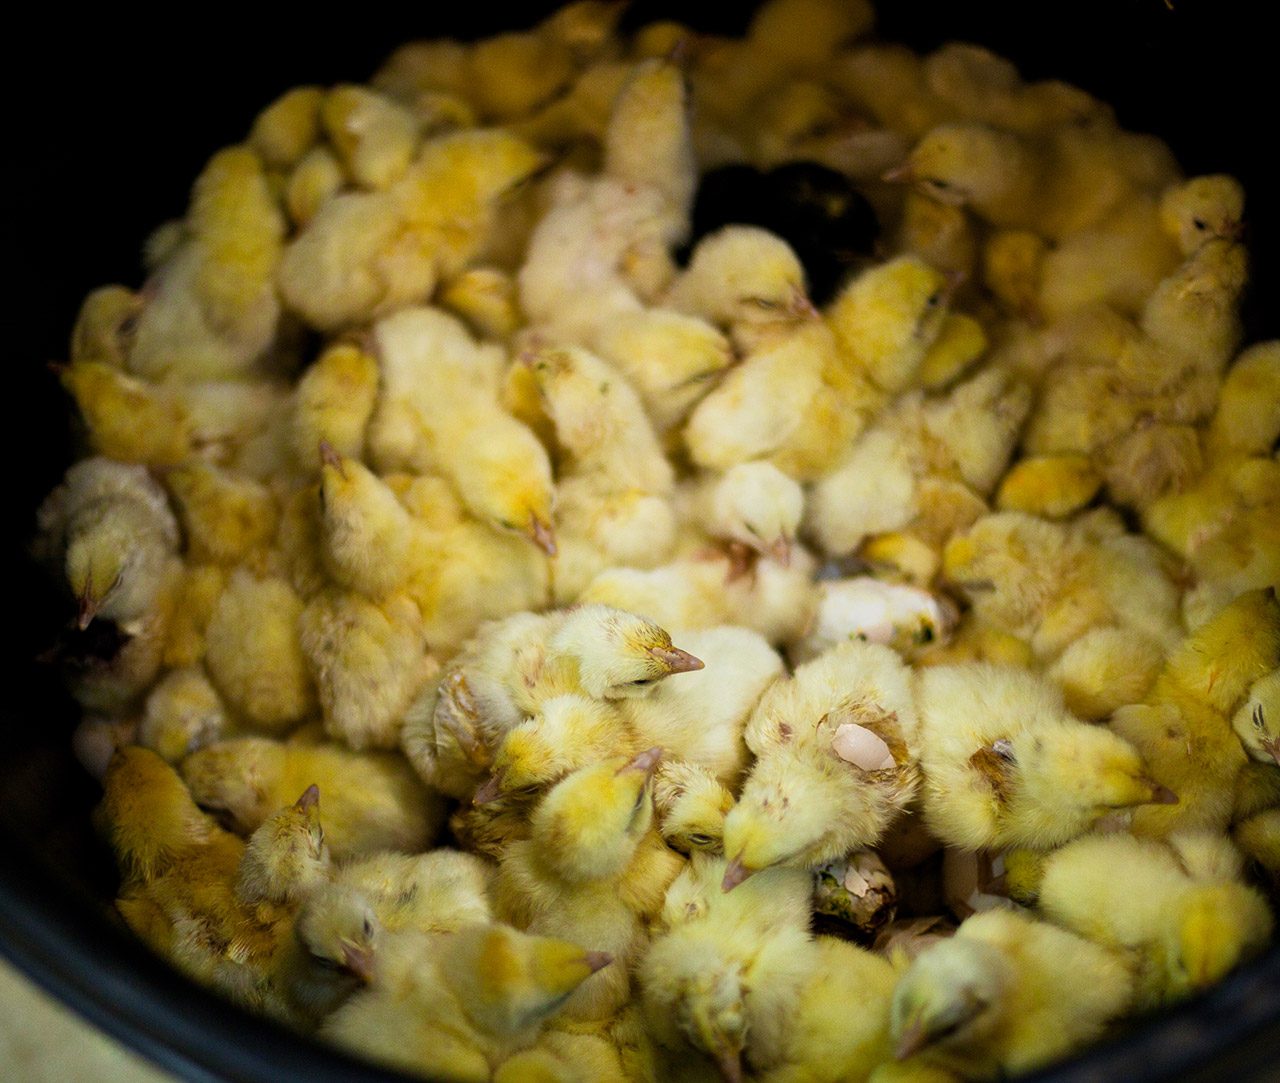 Baby chicks discarded at hatchery